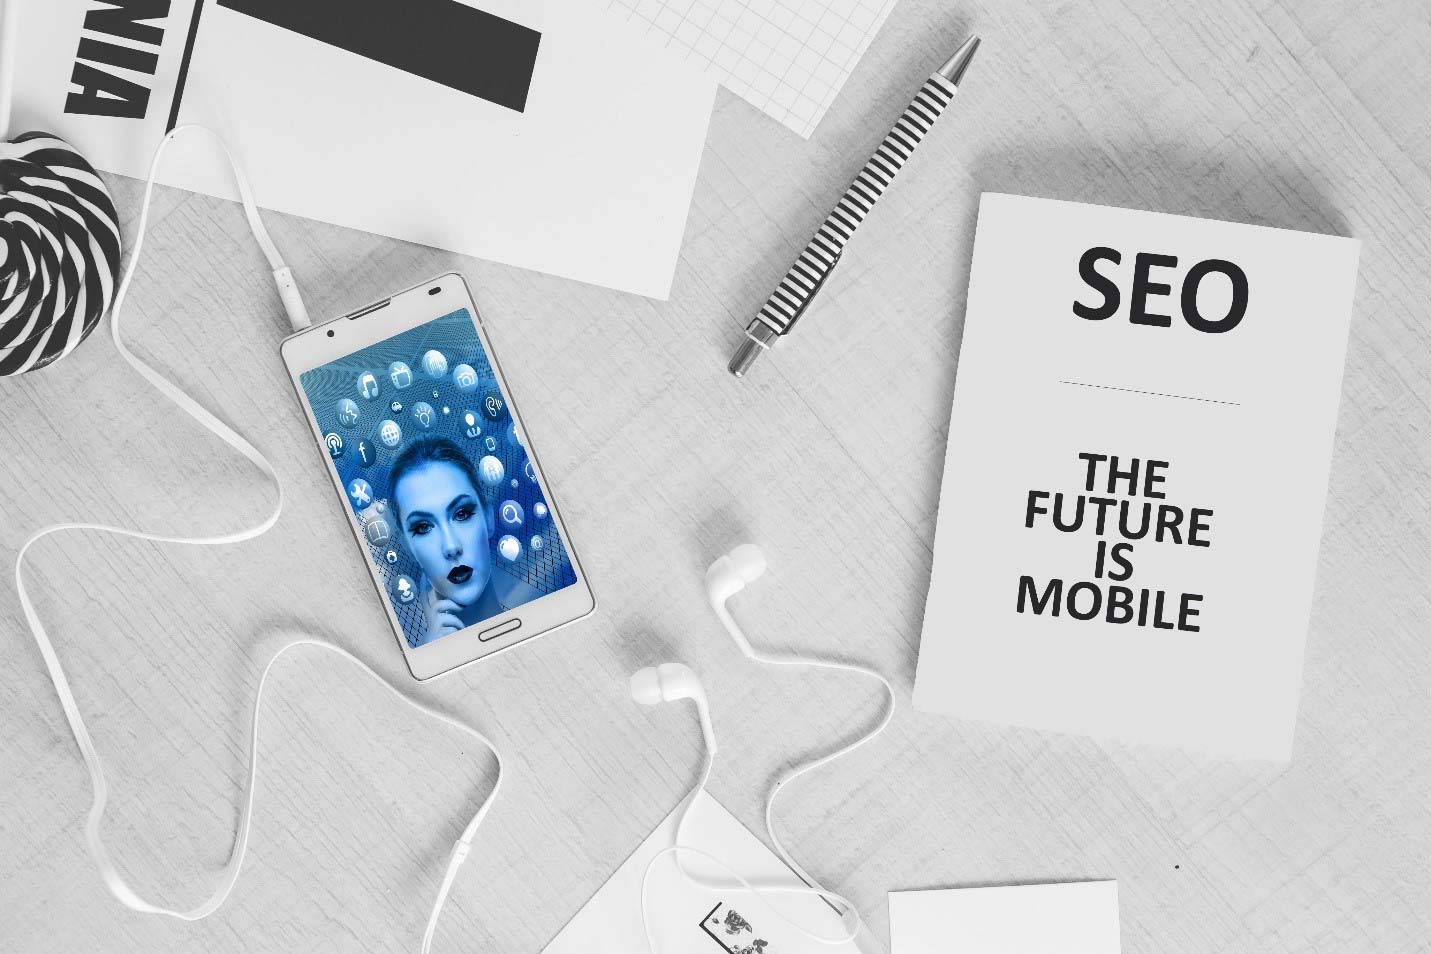 Image depicting that the future of onsite SEO is mobile